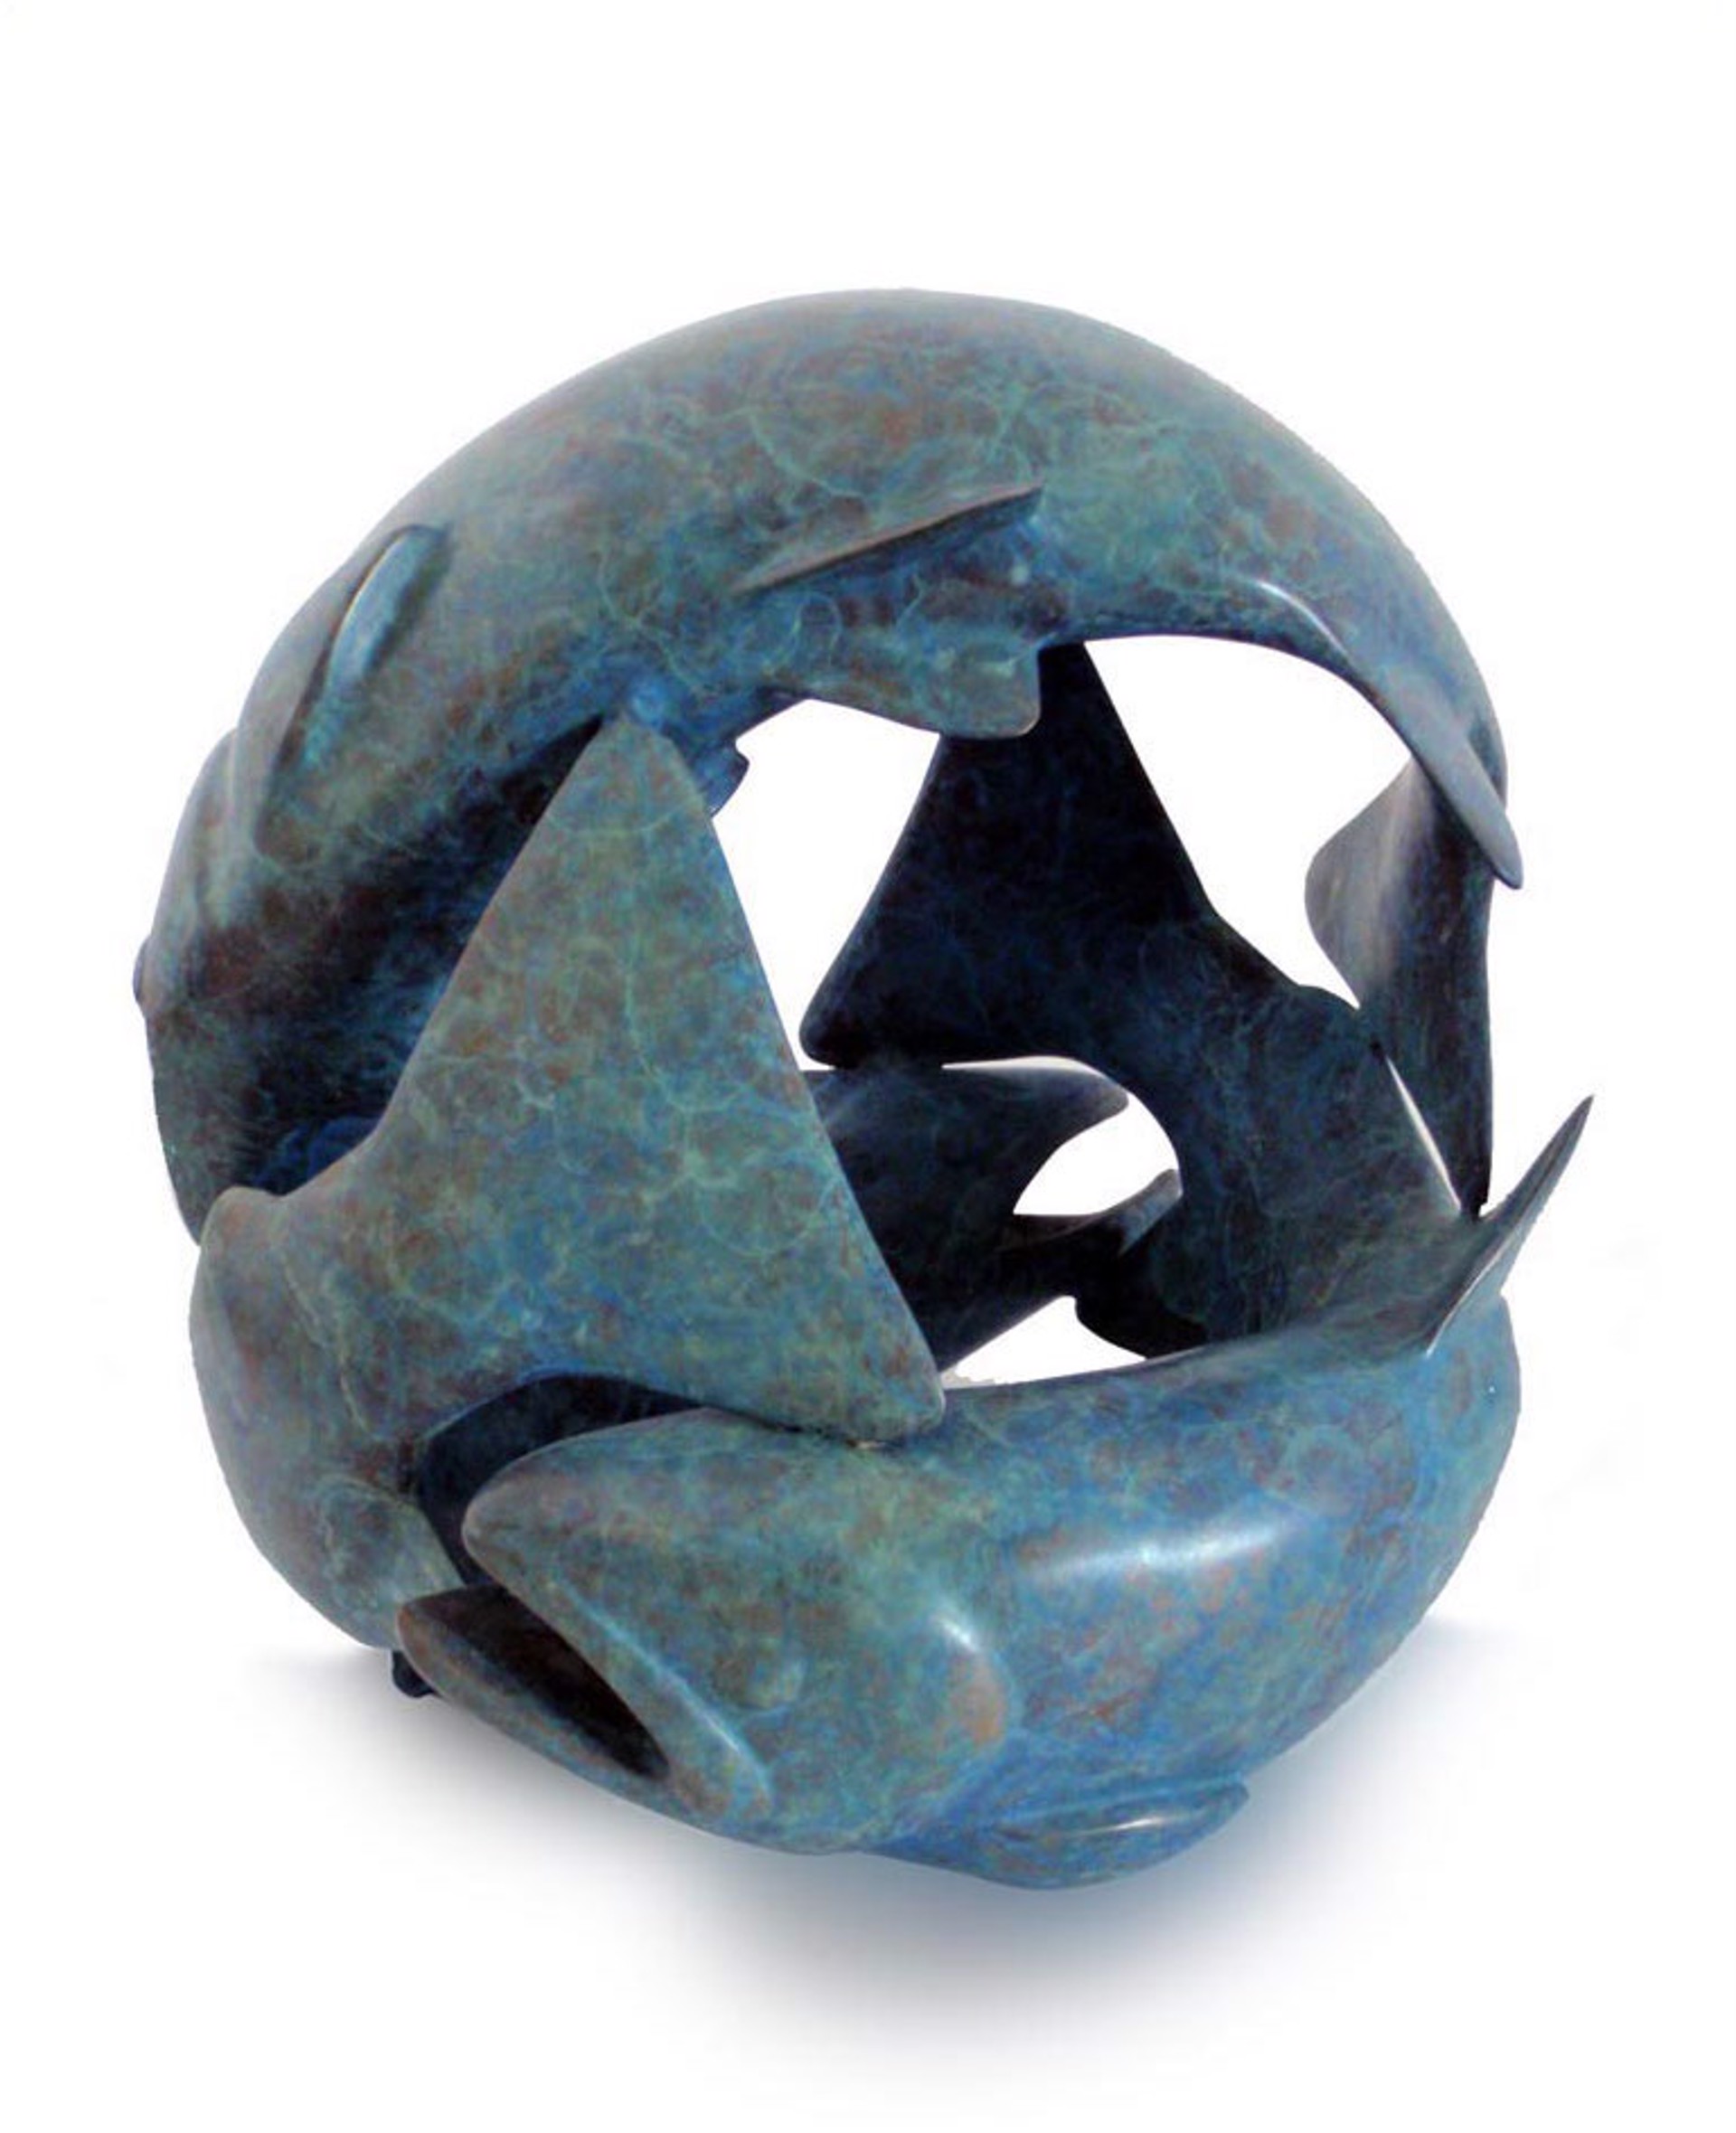 A Contemporary Sculpture Of Three Fish That Form A Ball, By Kristine Taylor